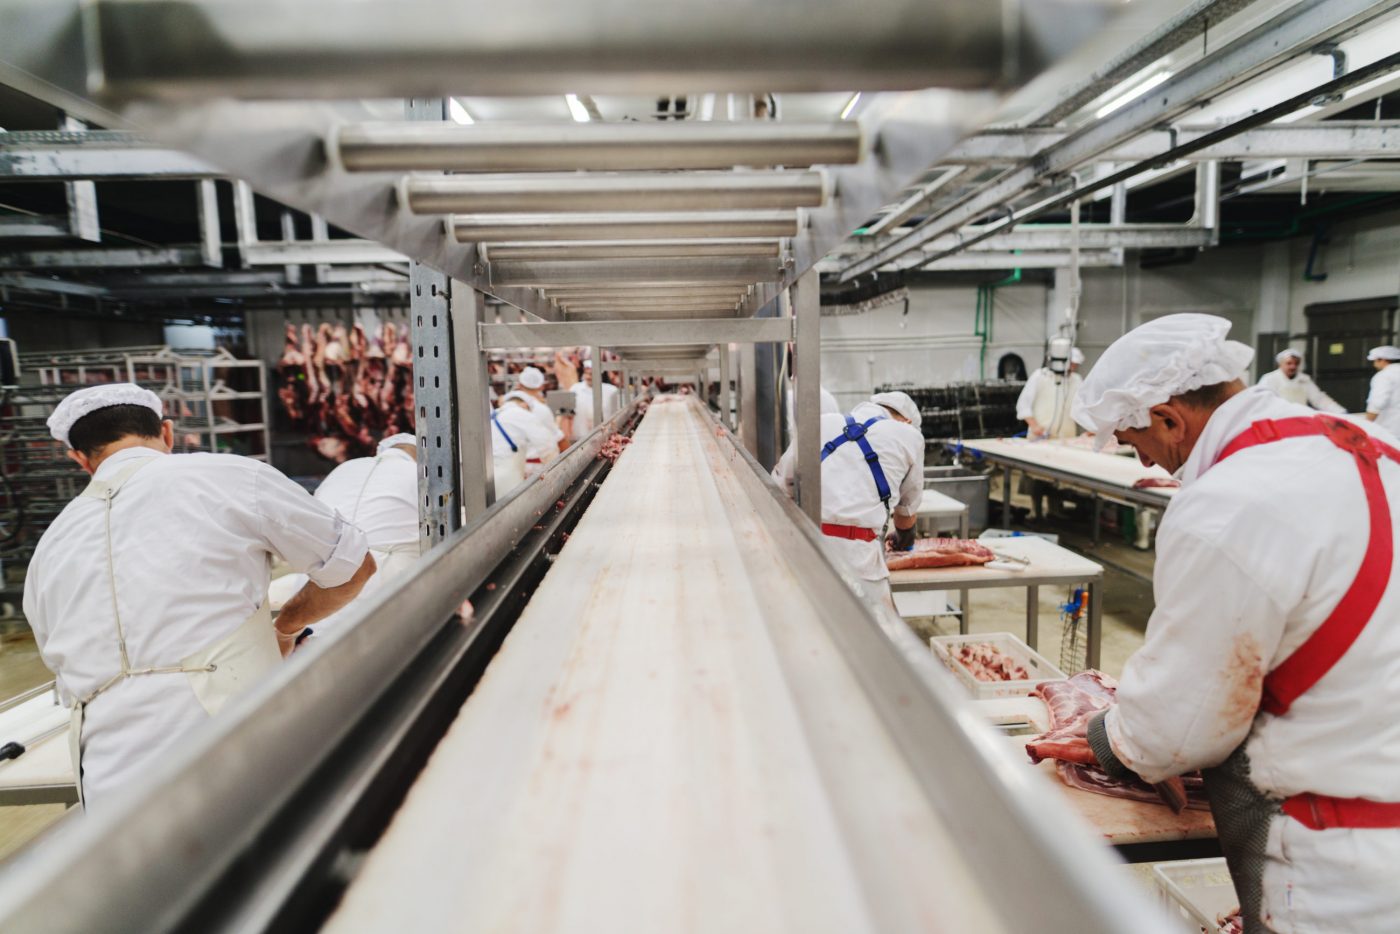 Vertical explainer photo 2 - Workers standing in a meat processing facility